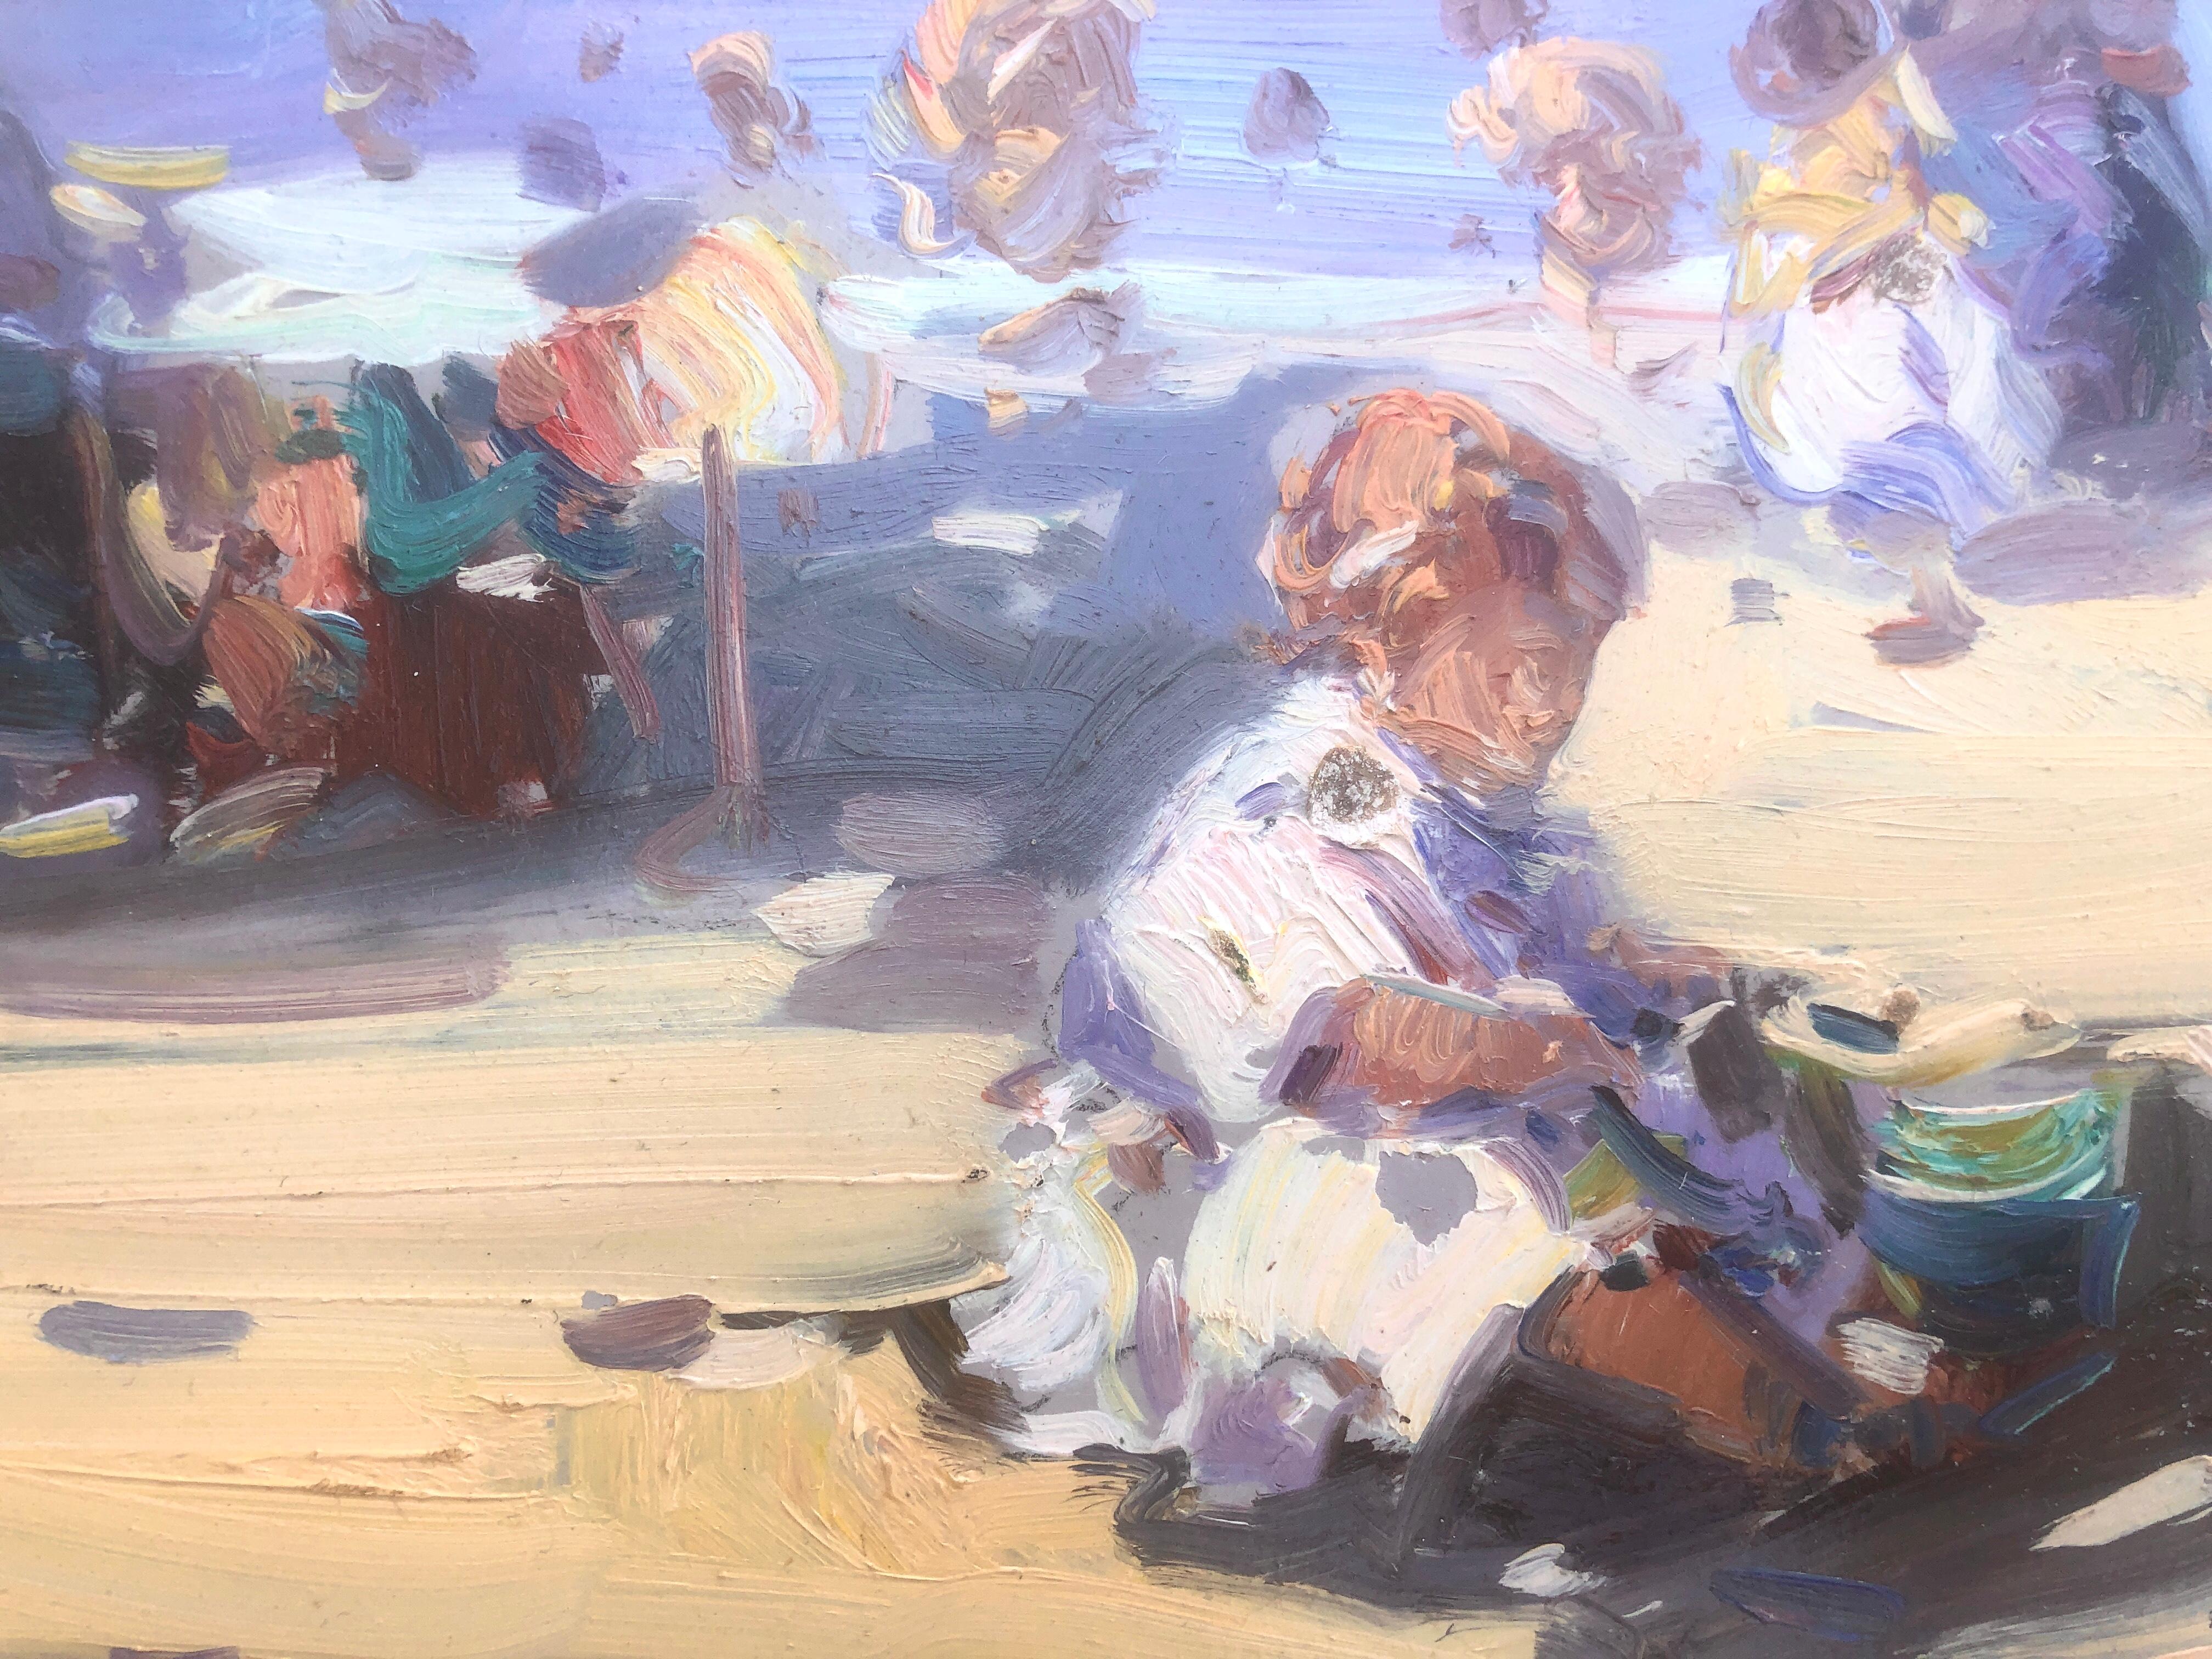 Spanish people on the beach Spain oil on board painting - Post-Impressionist Painting by Gabriel Casarrubios